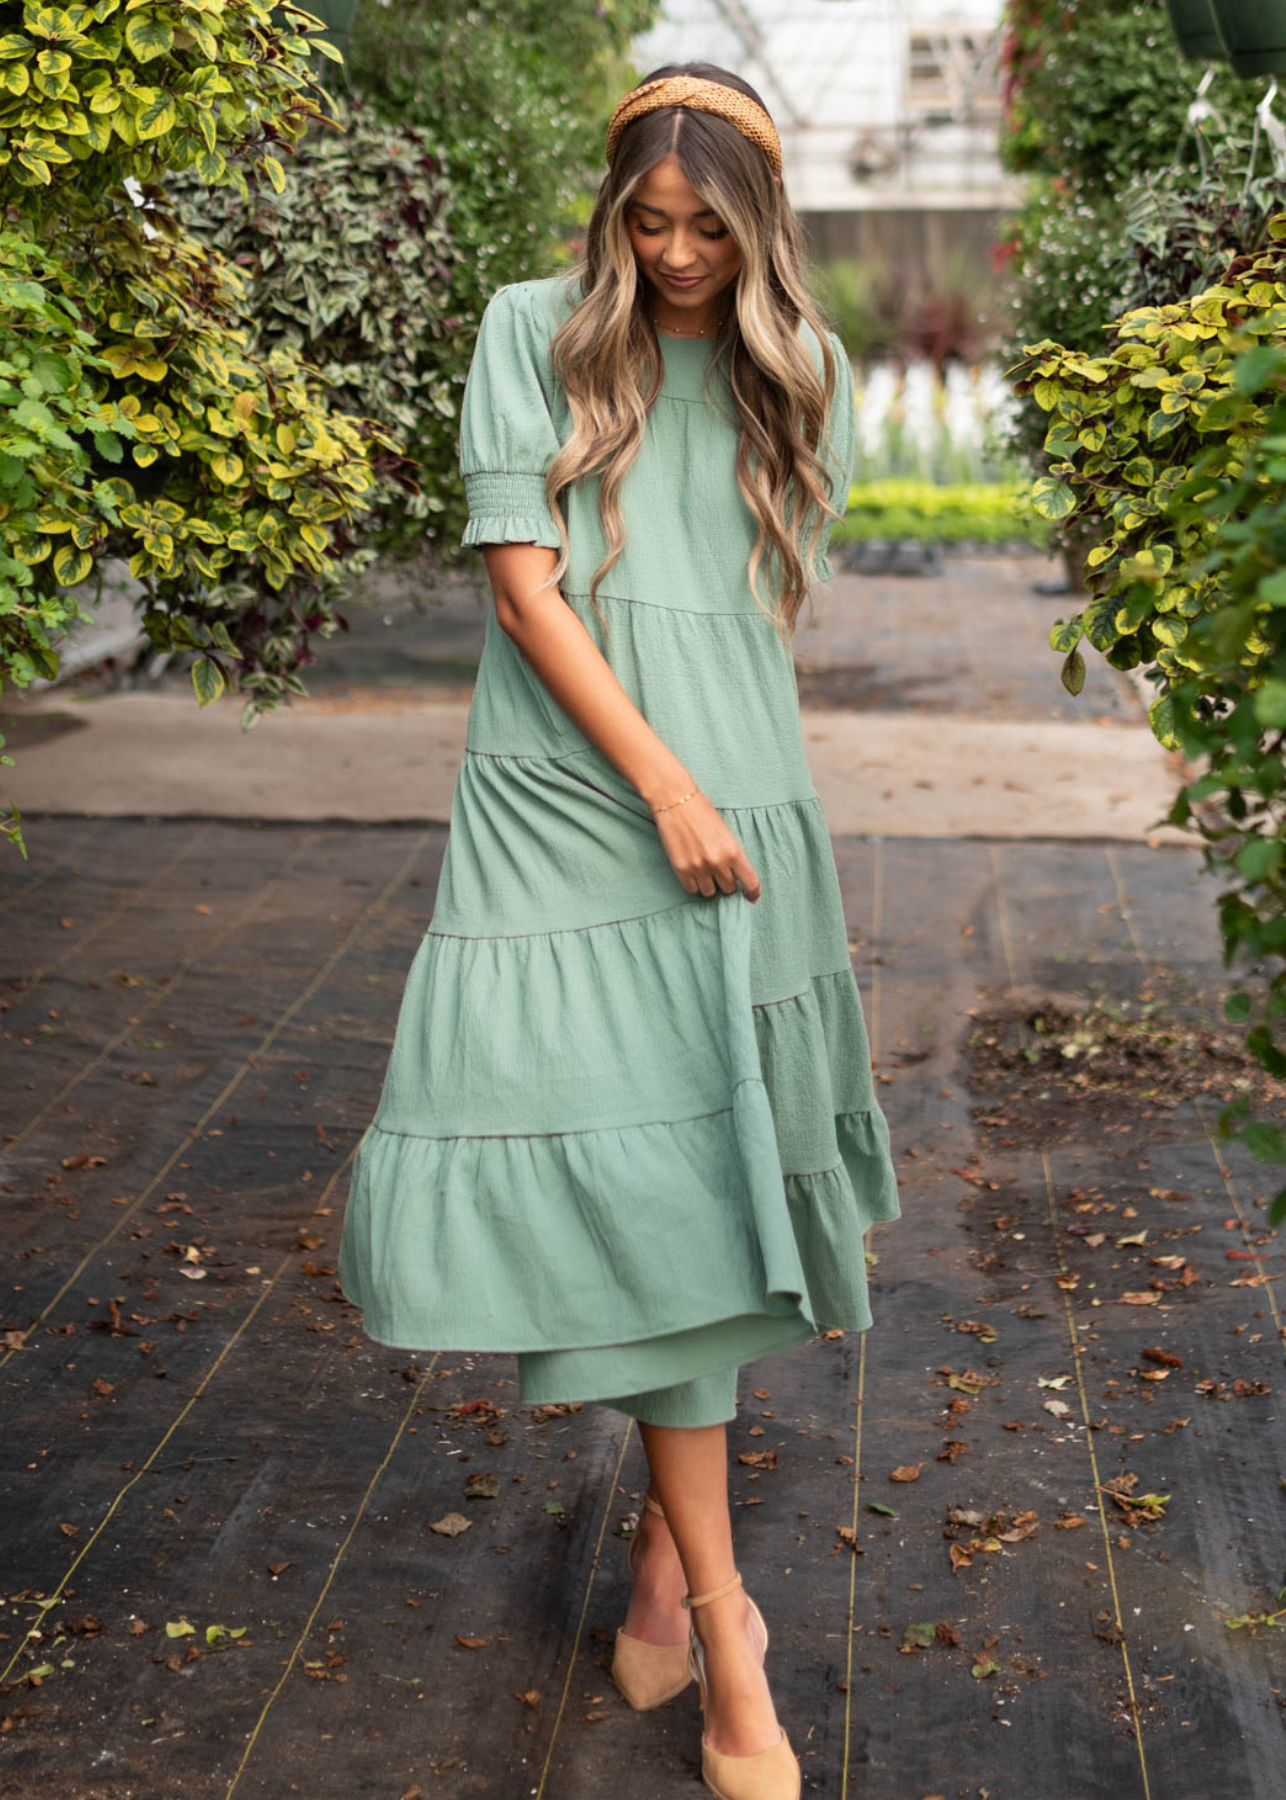 Small tiered green dress